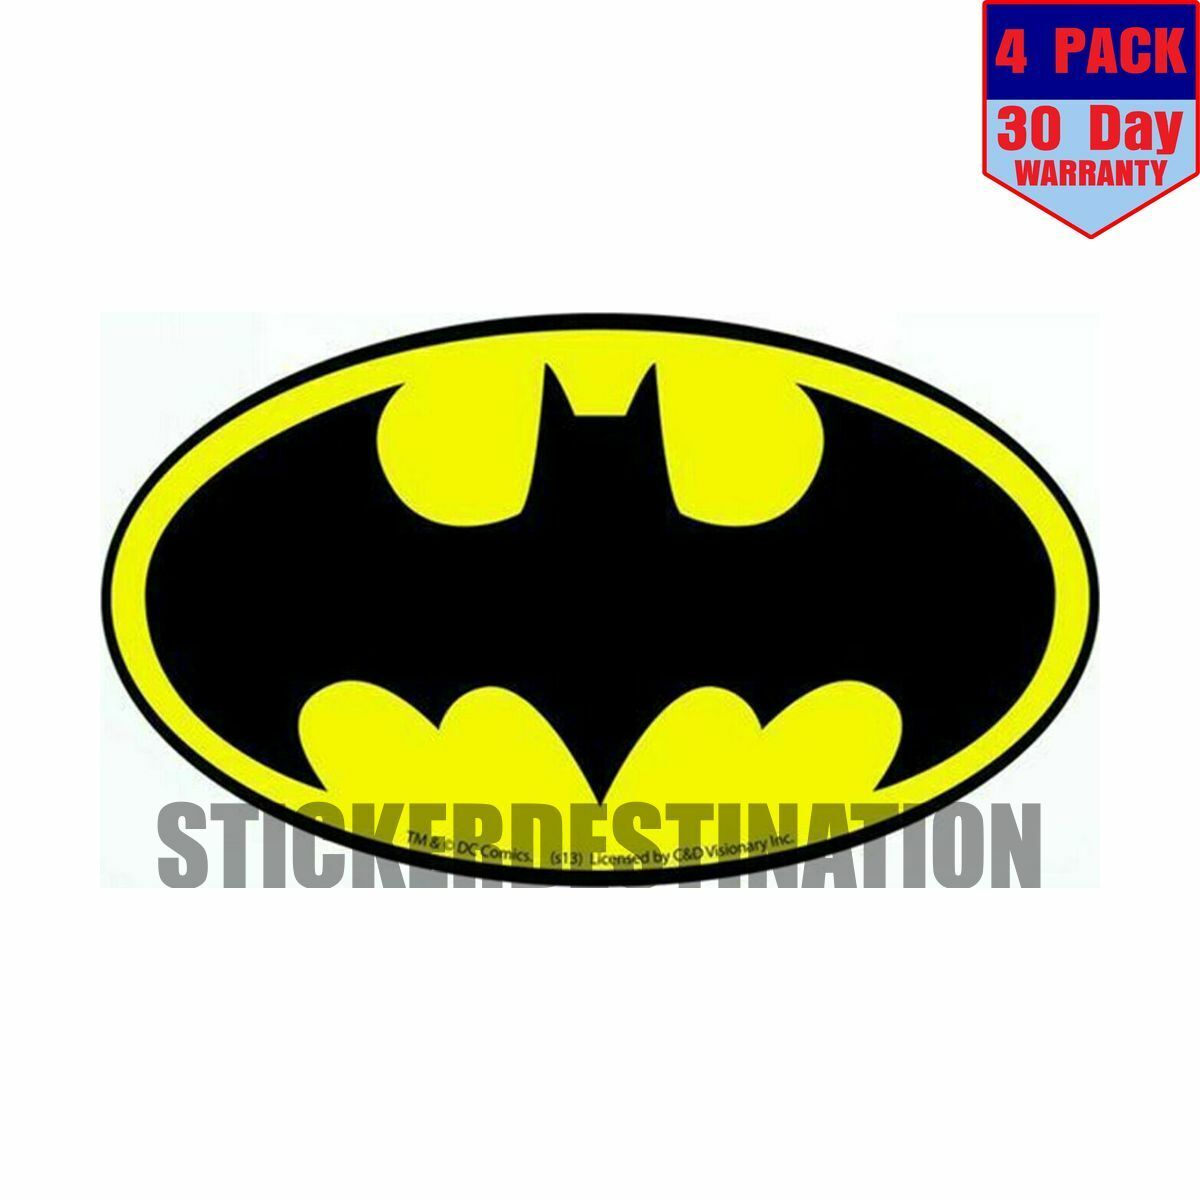 Batman 4 pack 4x4 Animer and price revision Sticker Clearance SALE! Limited time! Inch Decal